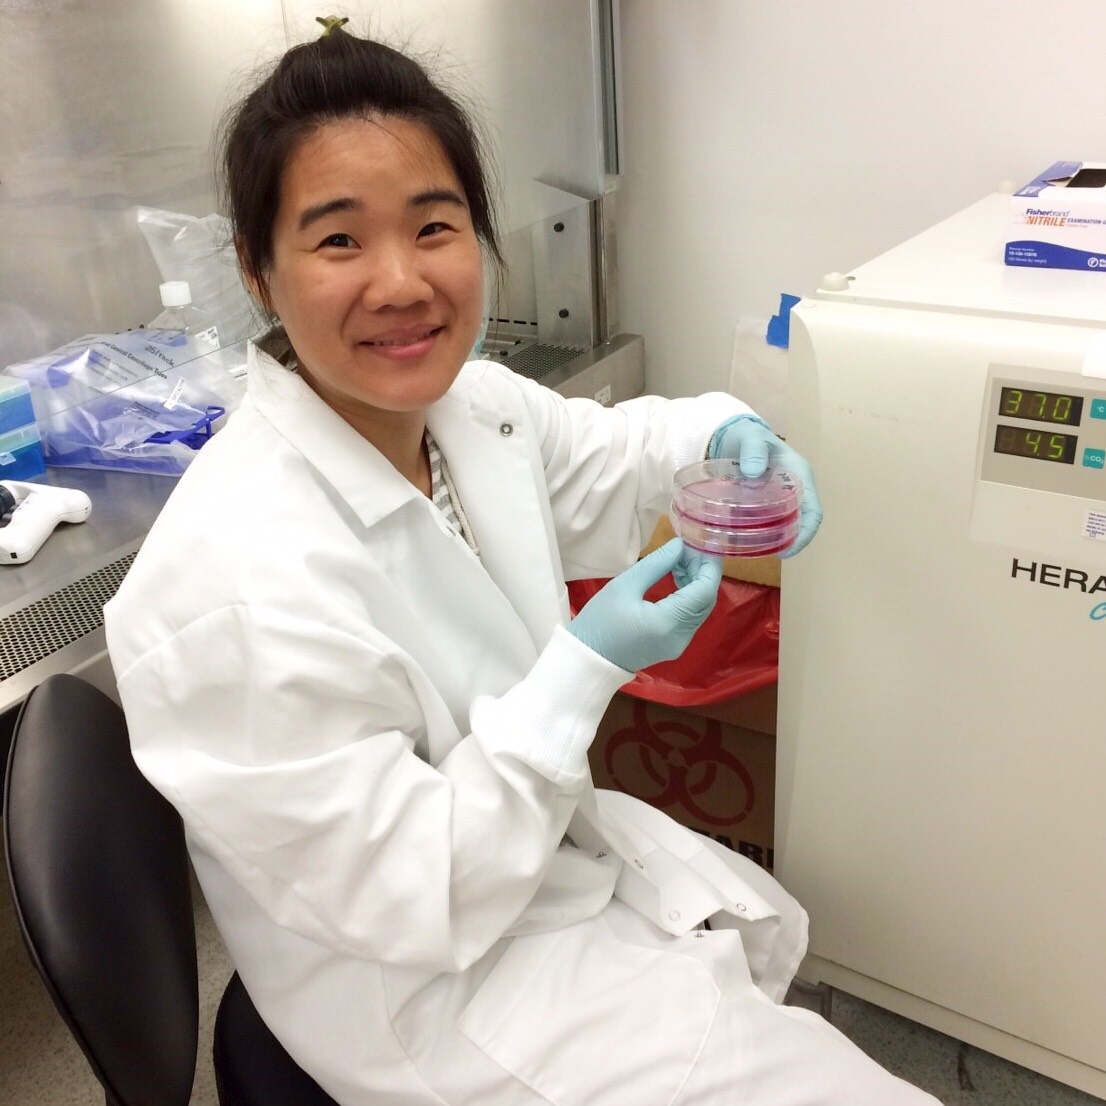 CMRL welcomes Denise Hsu as a new PhD student co-advised by Dr. Ramaswamy